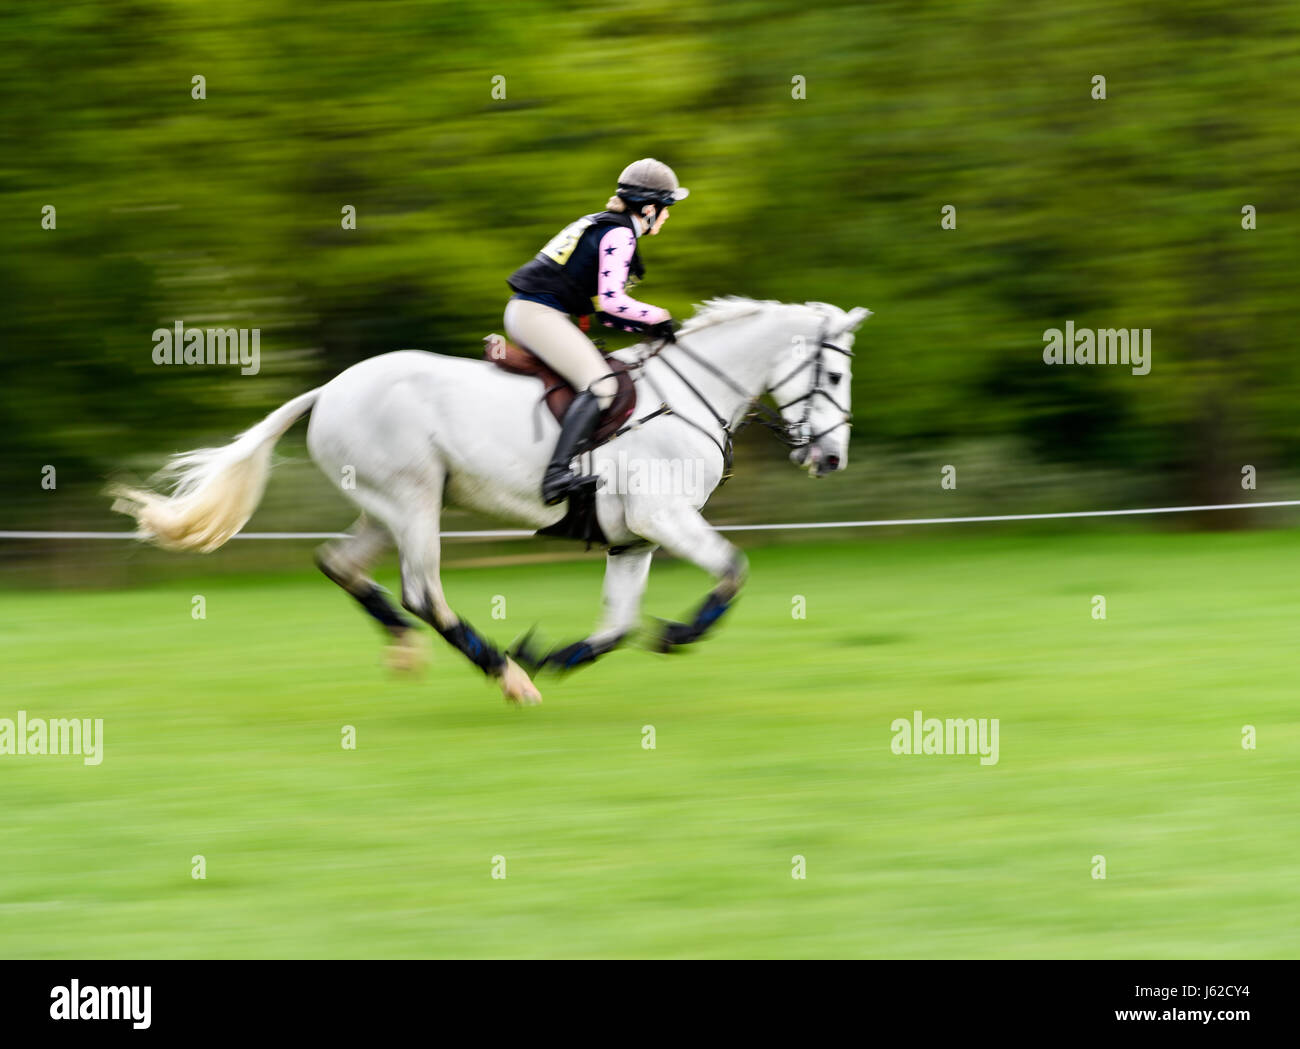 Rockingham Castle grounds, Corby, UK. 19th May, 2017. The horse 'Derrys Lady Lou' ridden by Lily Mawby gallops past a coppice during the cross country event in the grounds of the Norman Rockingham Castle, Corby, England, on Thursday 19th May 2017. Credit: miscellany/Alamy Live News Stock Photo